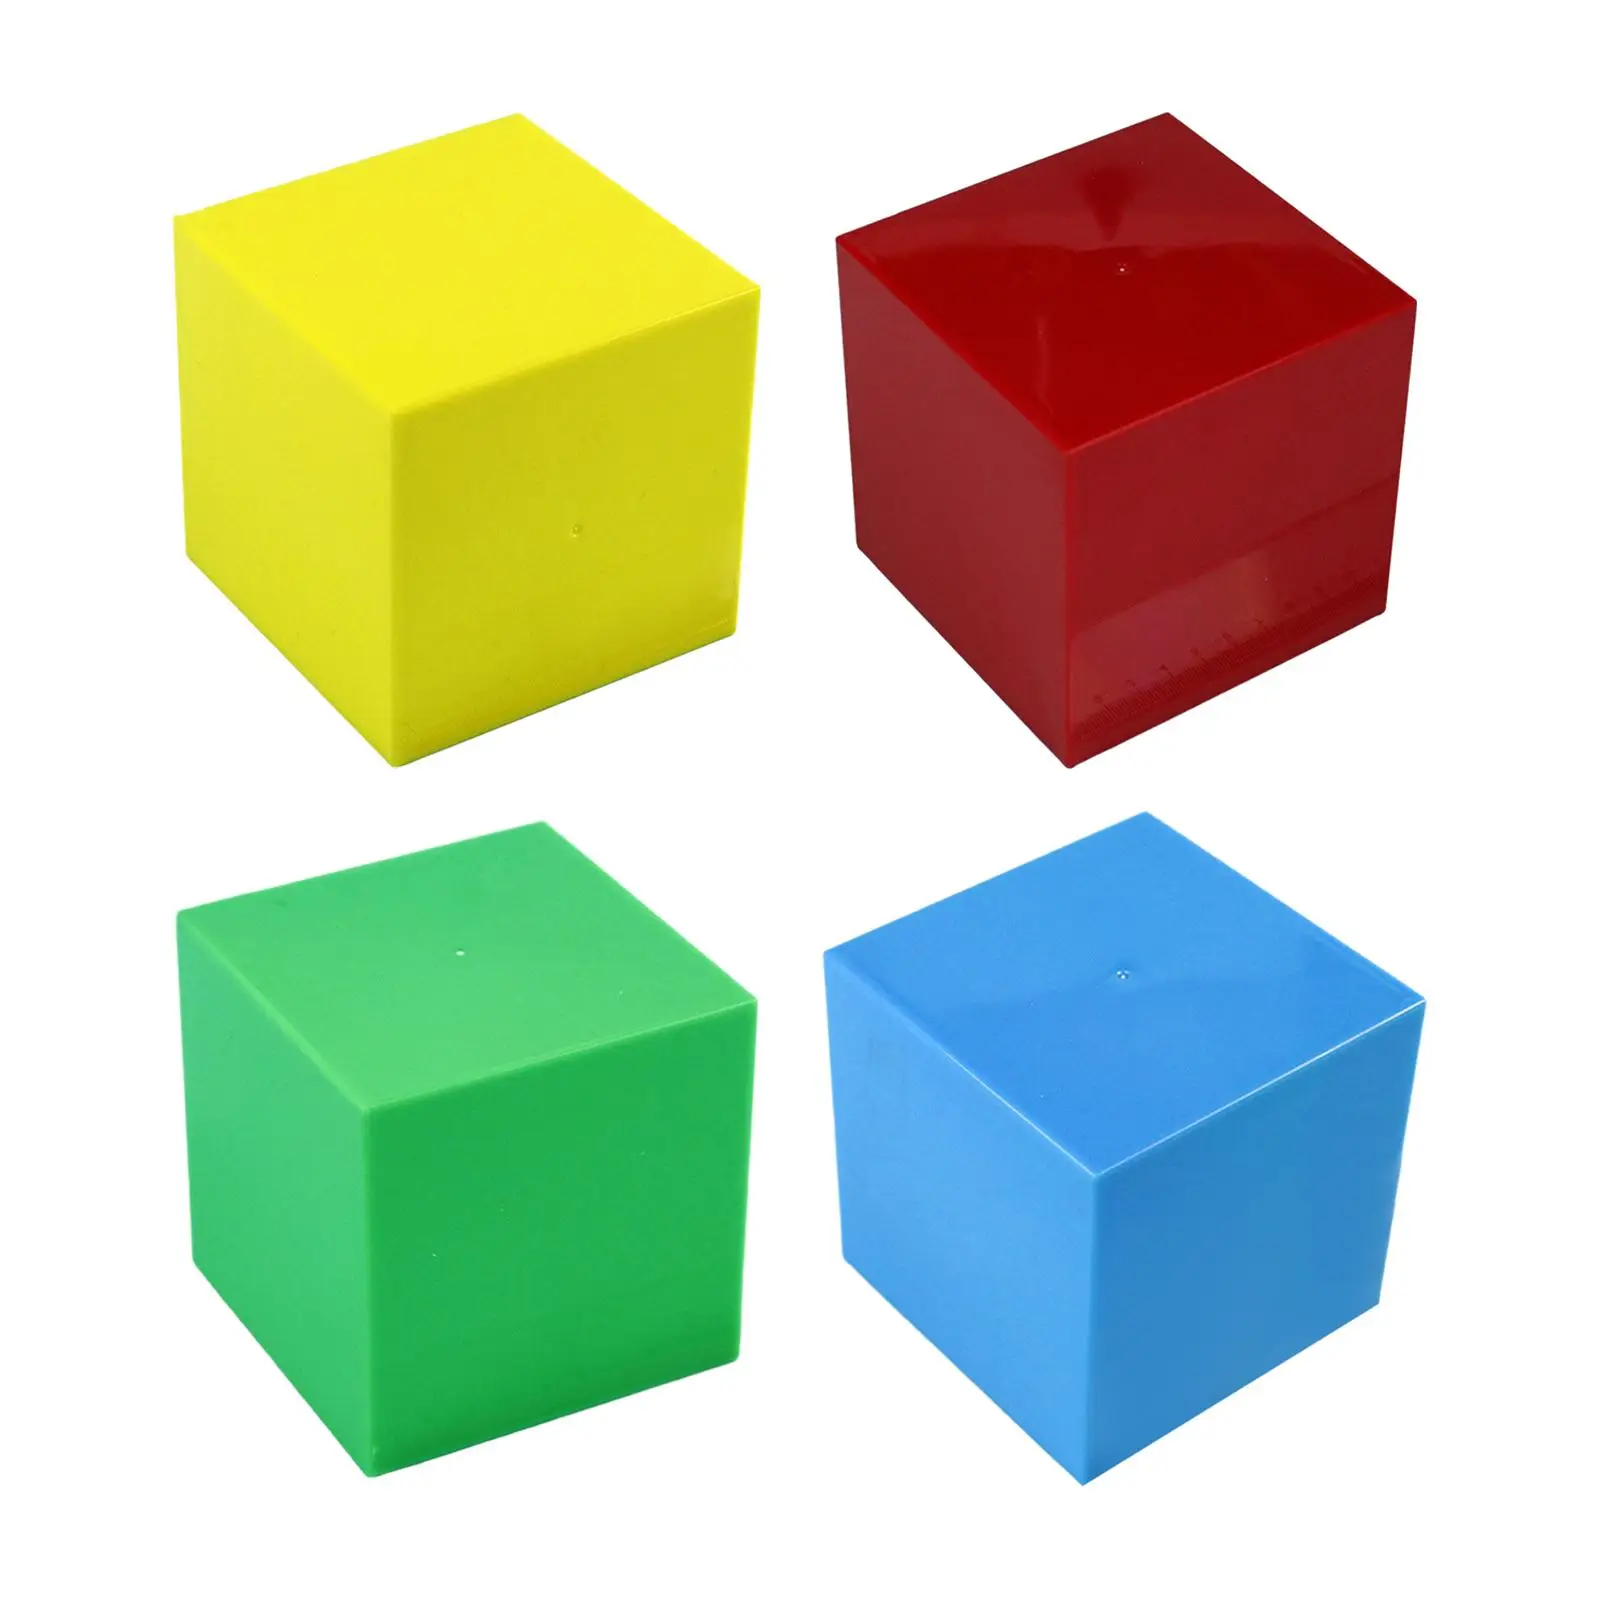 

Montessori Math Cube Kindergarten Educational Toy Geometric Teaching Aid Learning Material for Kids Ages 2+ Boys Girls Children